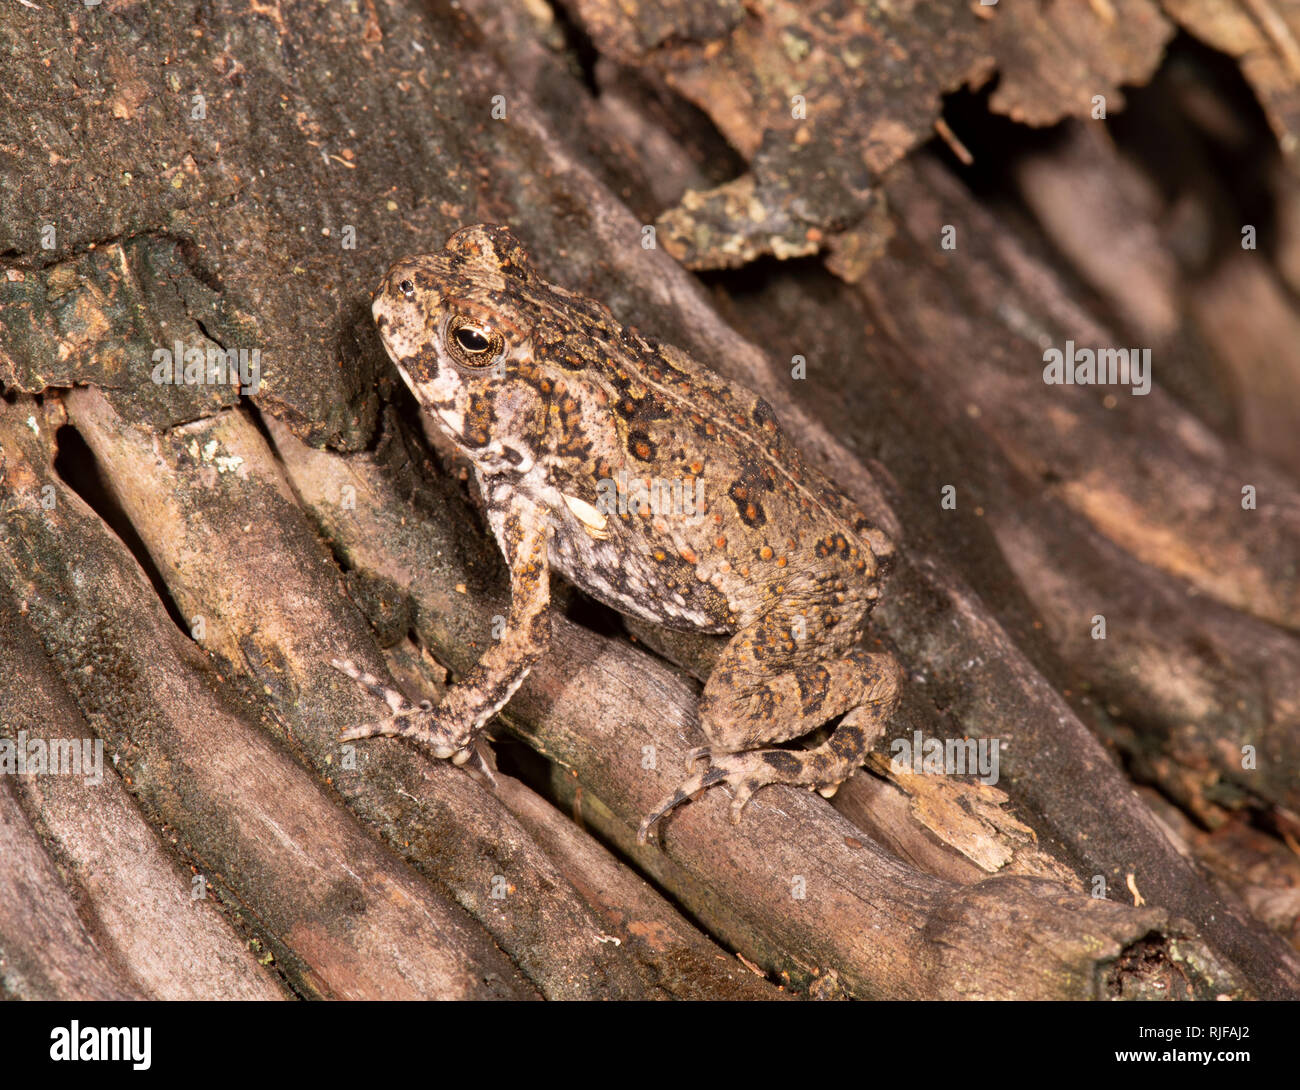 A camouflaged juvenile Cane Toad (Bufo Marinus or Rhinella marina) which is a pest introduced species in Australia Stock Photo